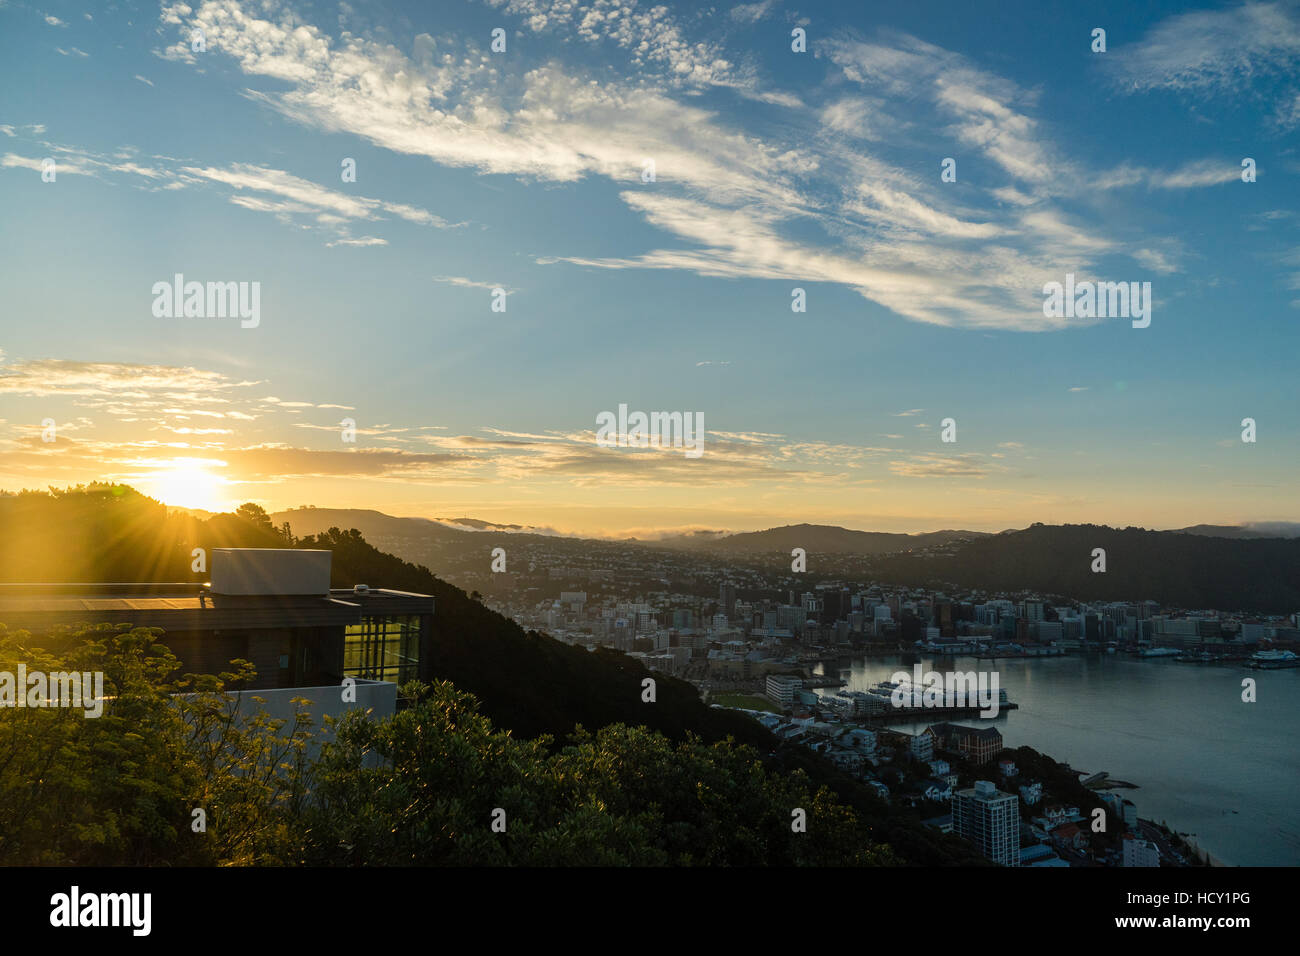 The sun sets over a new home atop Mount Victoria in Wellington, North Island, New Zealand Stock Photo